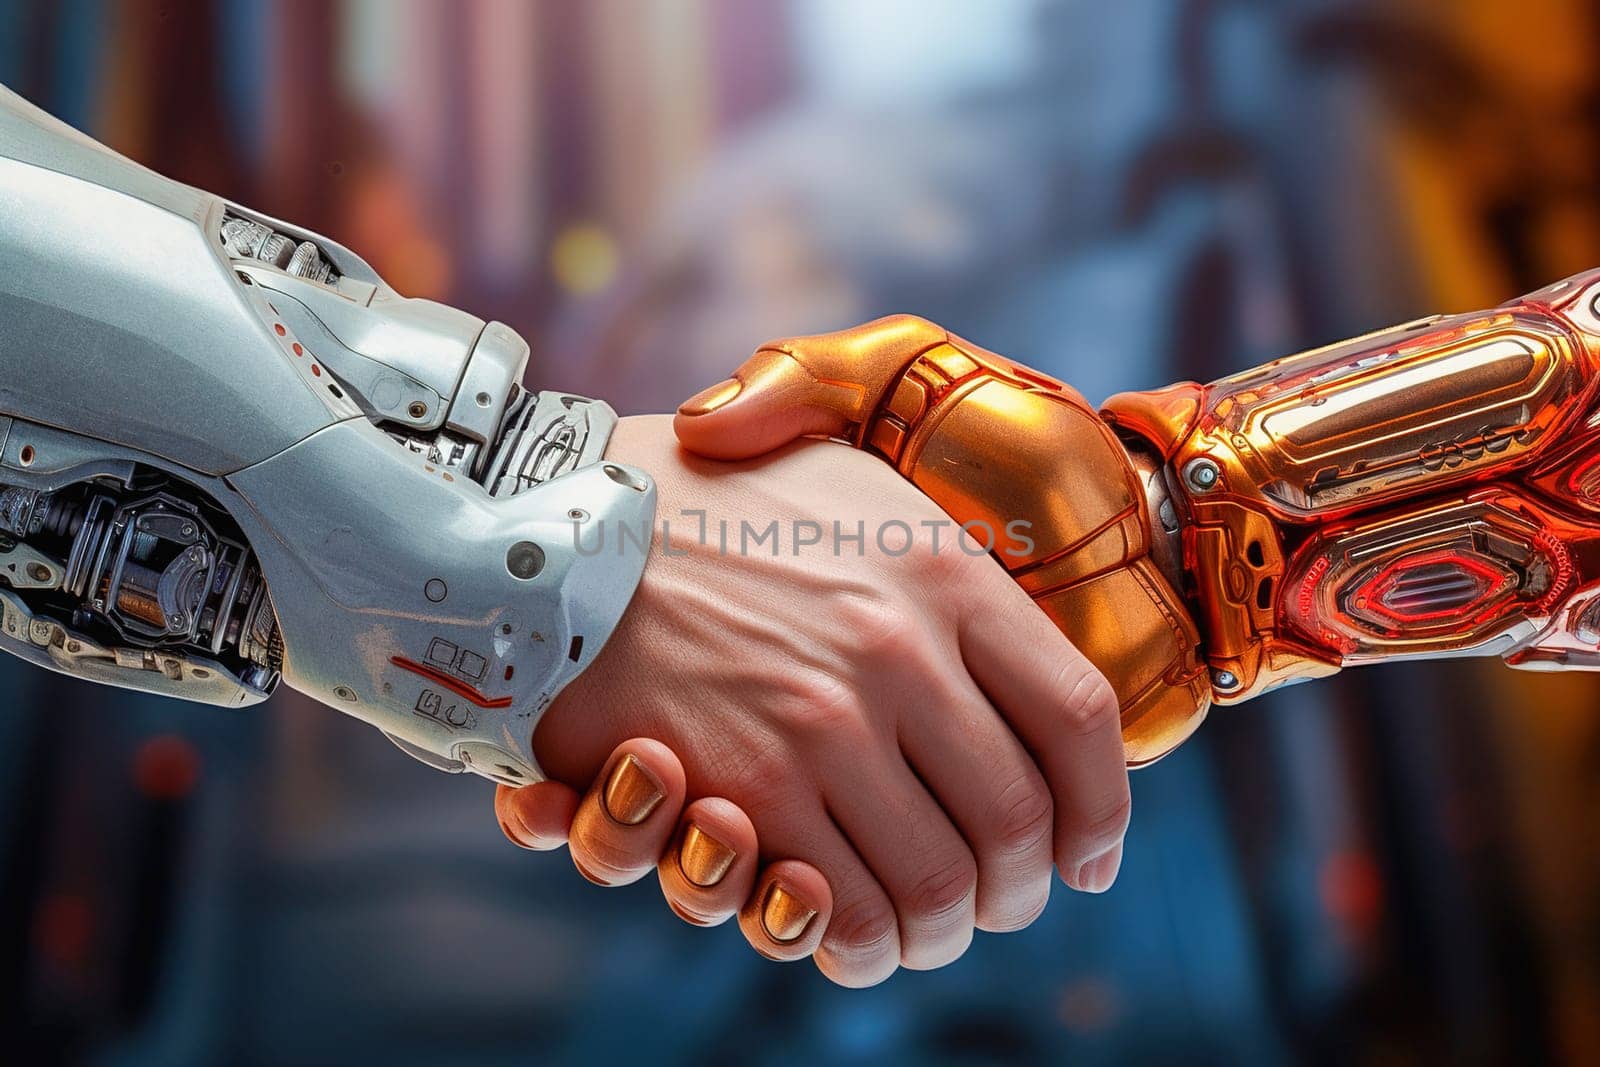 Robot handshake. The concept of trust in artificial intelligence. by Yurich32